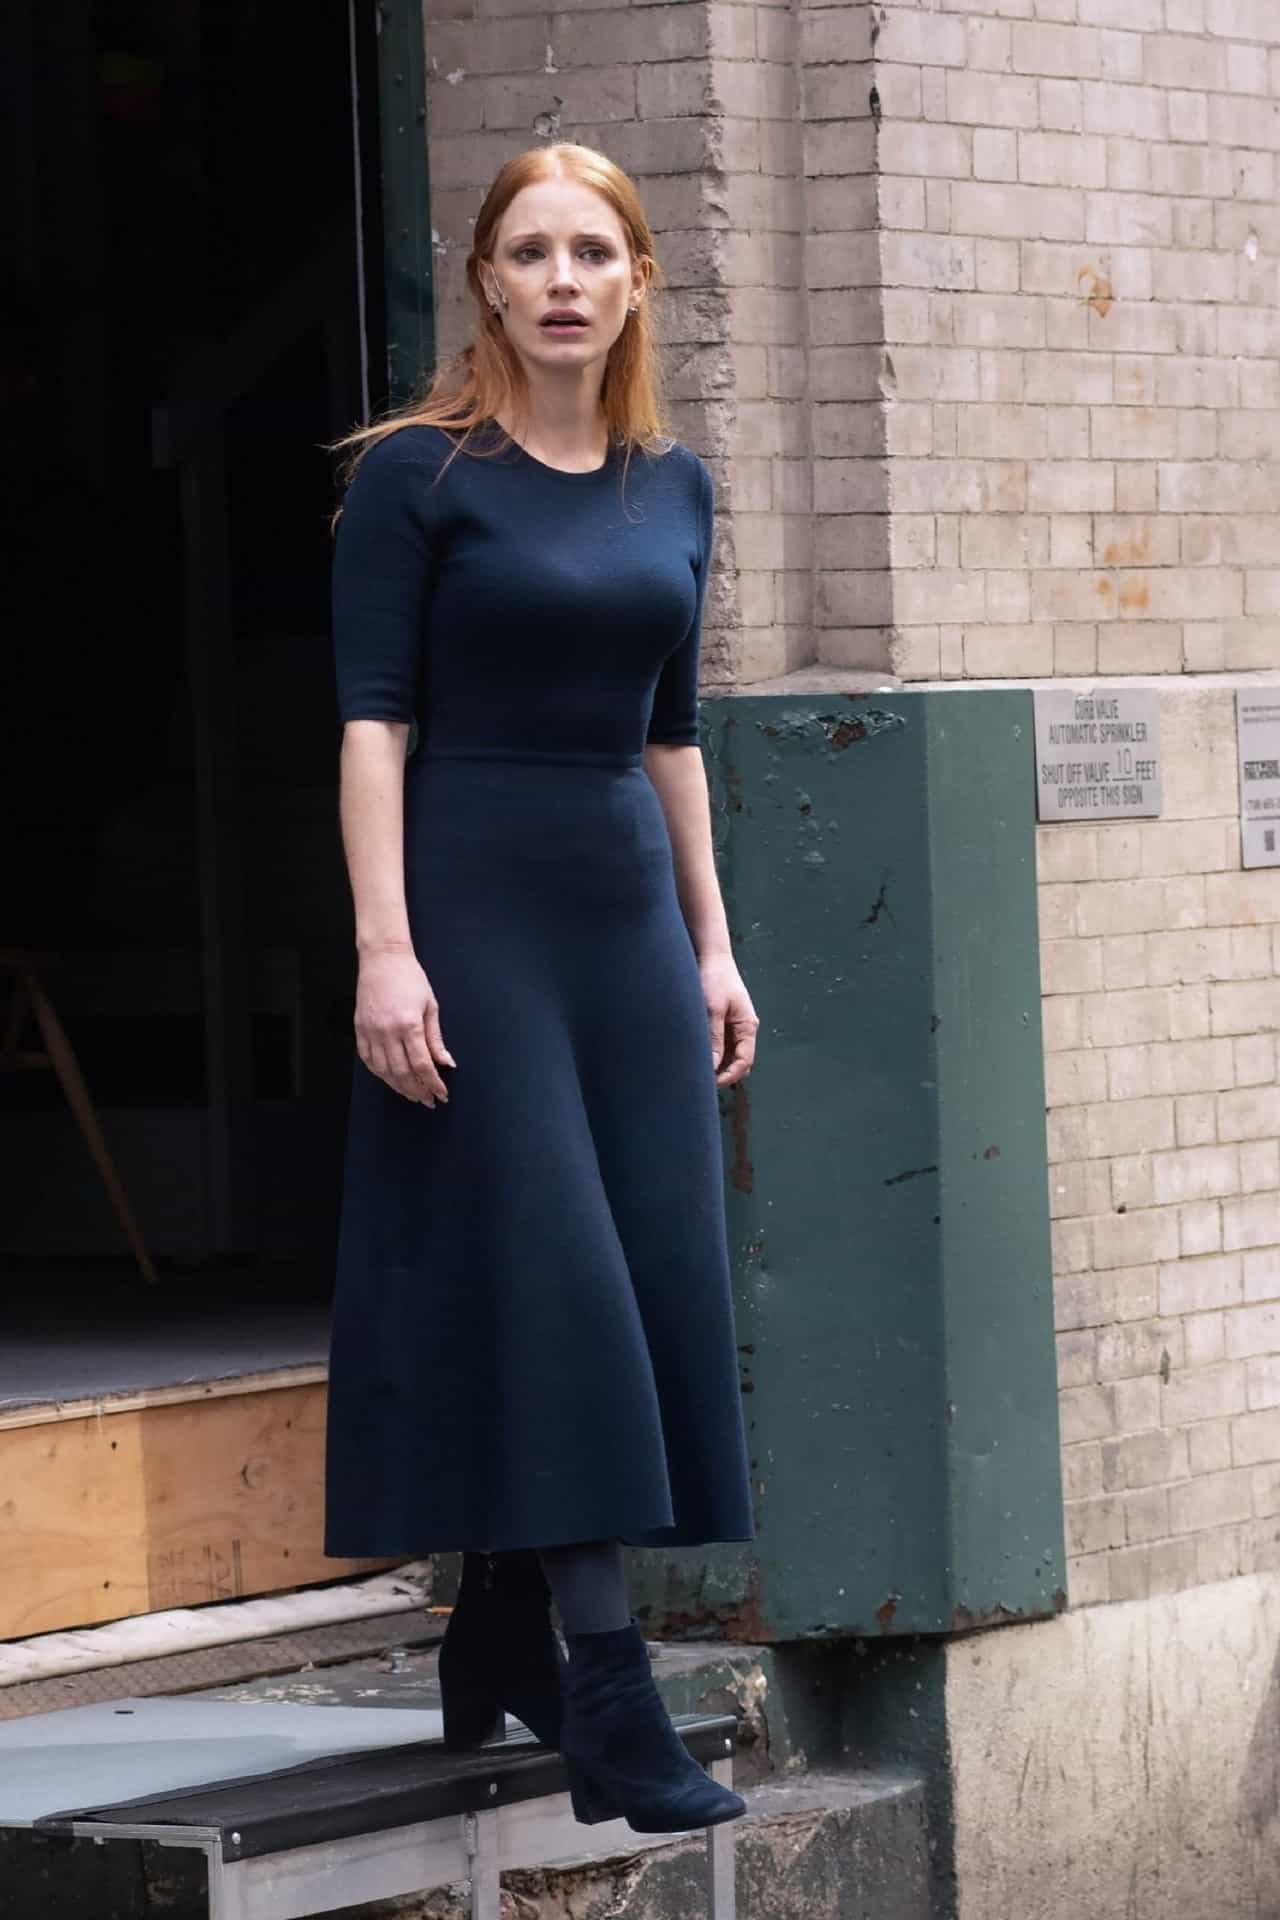 Jessica Chastain Shines in Character as She Steps Out of the Theater